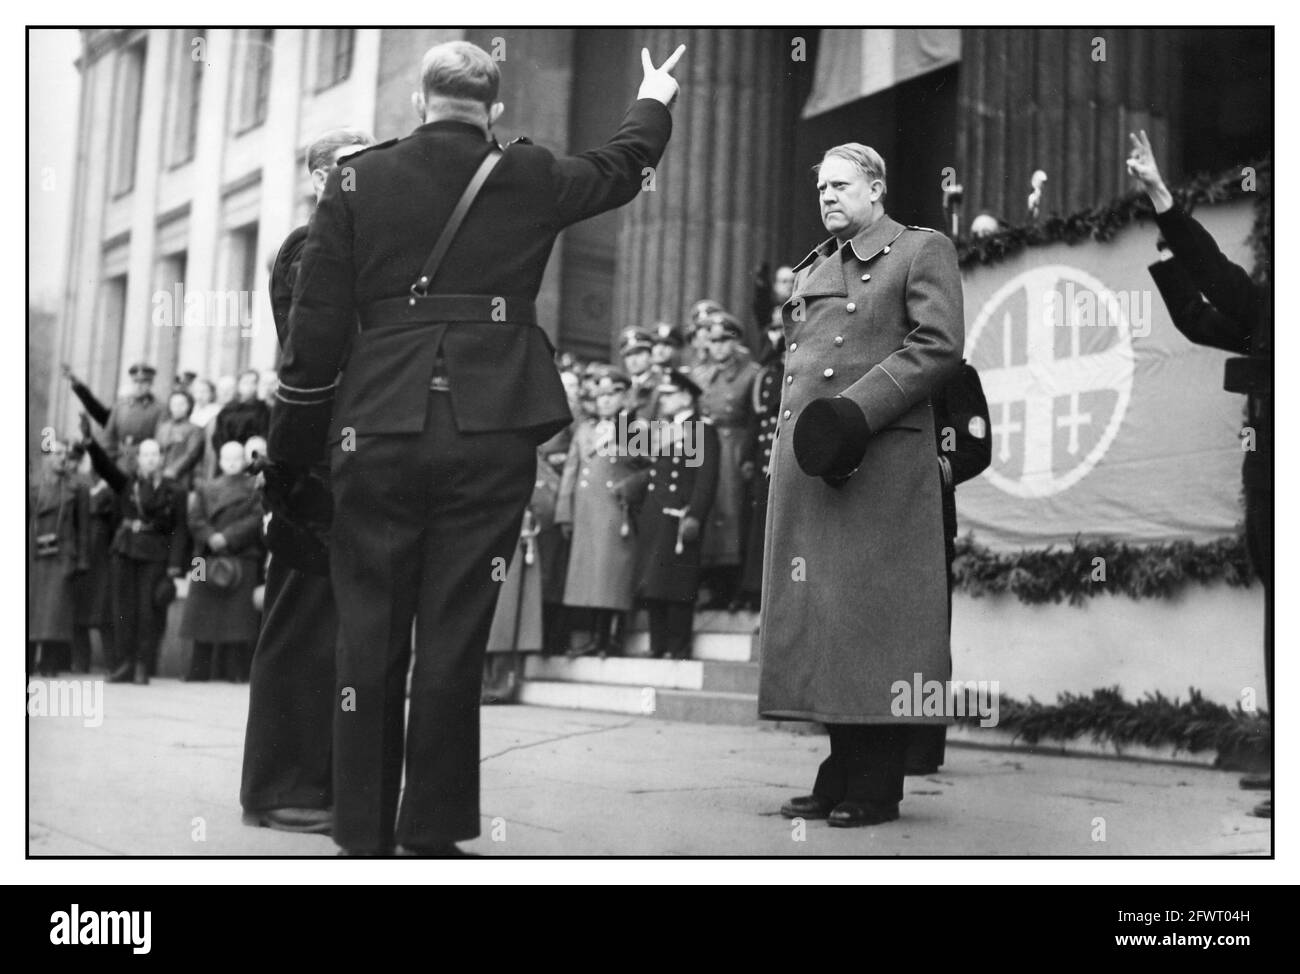 QUISLING November 1941 according to propaganda coverage in Aftenposten 3 November 1941. On Sunday there was a hirdopp march, speeches by Chief of Staff Orvar Sæther and NS leader Vidkun Quisling as well as taking the oath at Universitetsplassen in Oslo: Norway Stock Photo